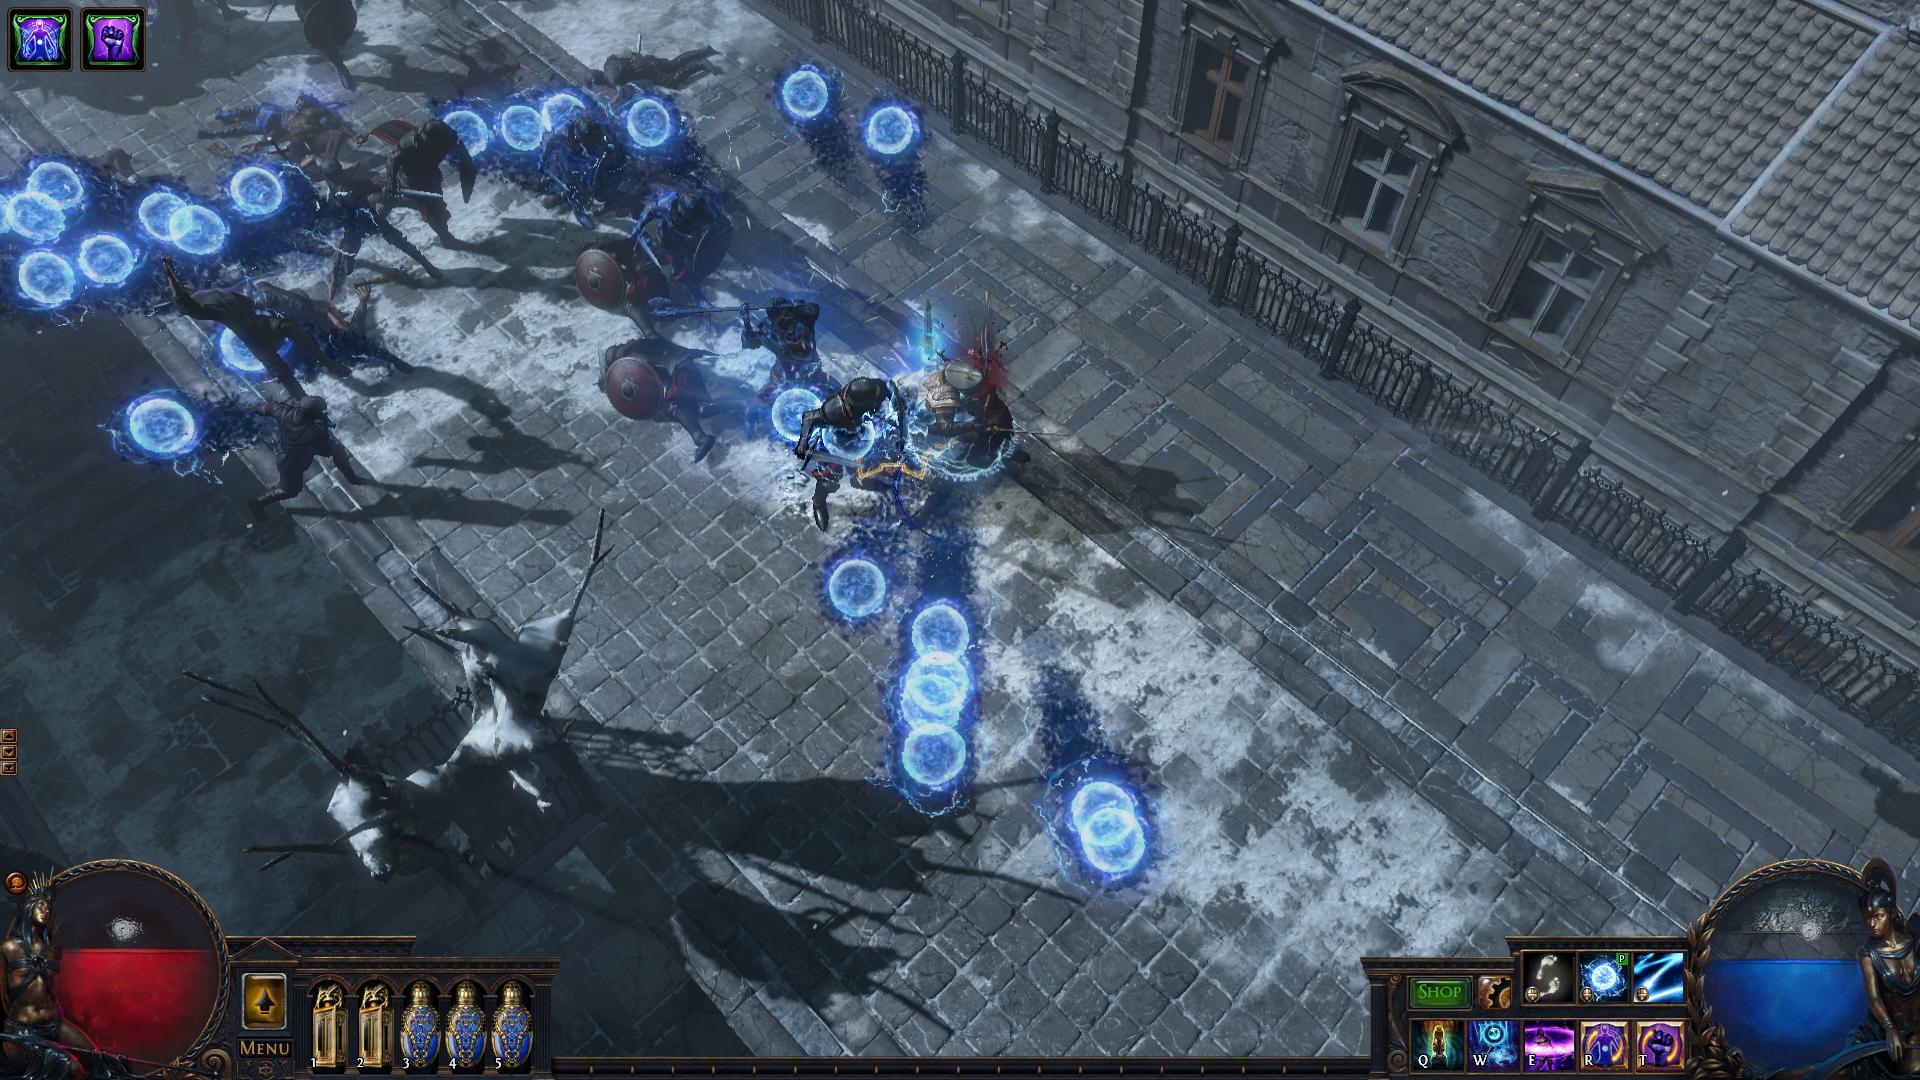 Screenshot №26 from game Path of Exile